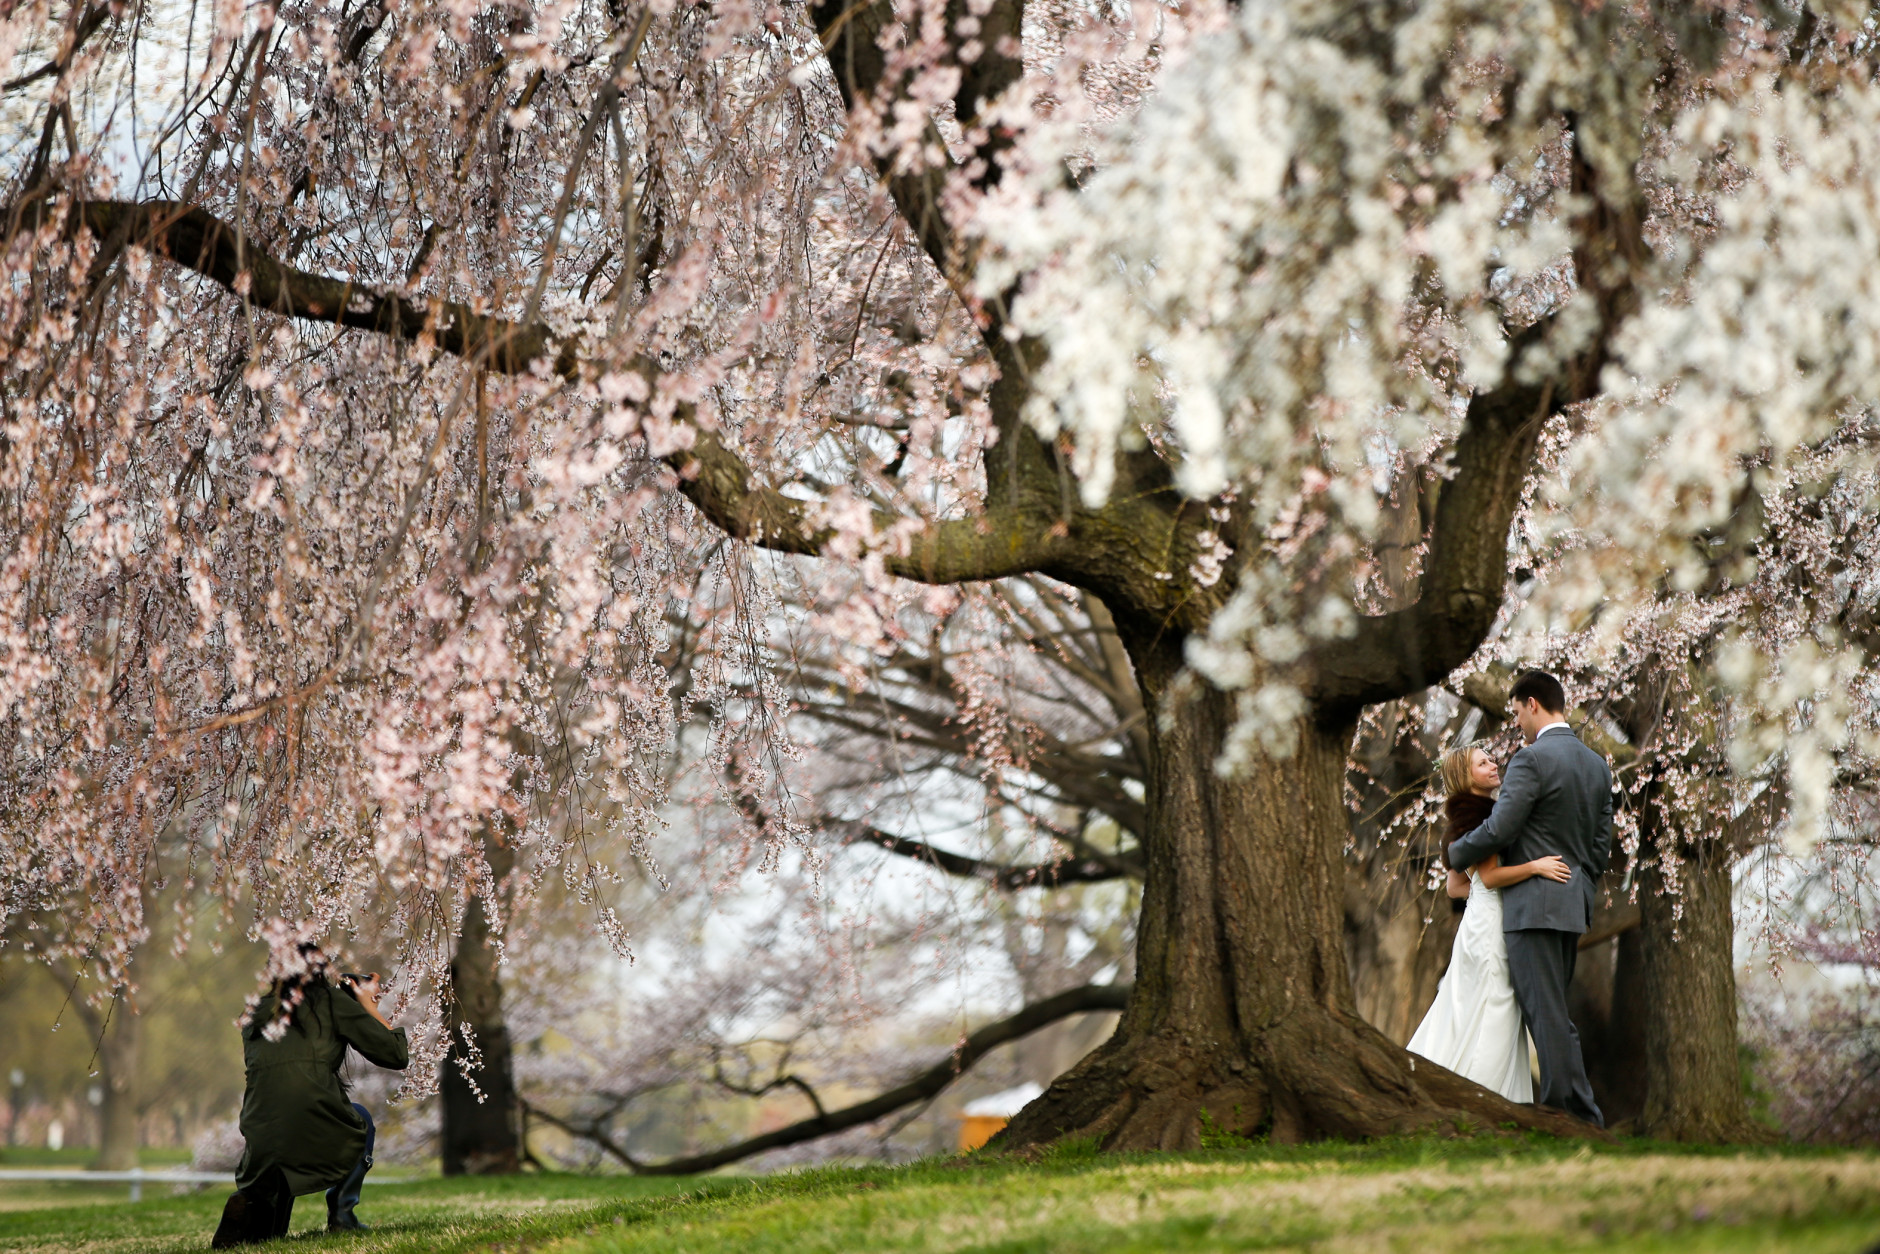 Rebekah Murray of Leesburg, Va., left, photographs Luke and Carolyn Woods of Silver Spring, Md., among the cherry blossoms trees in Washington, Tuesday, April 7, 2015. Luke and Carolyn were married four years ago and are retaking their wedding photos. Officials are calling for a peak bloom period from April 11-14th. (AP Photo/Andrew Harnik)